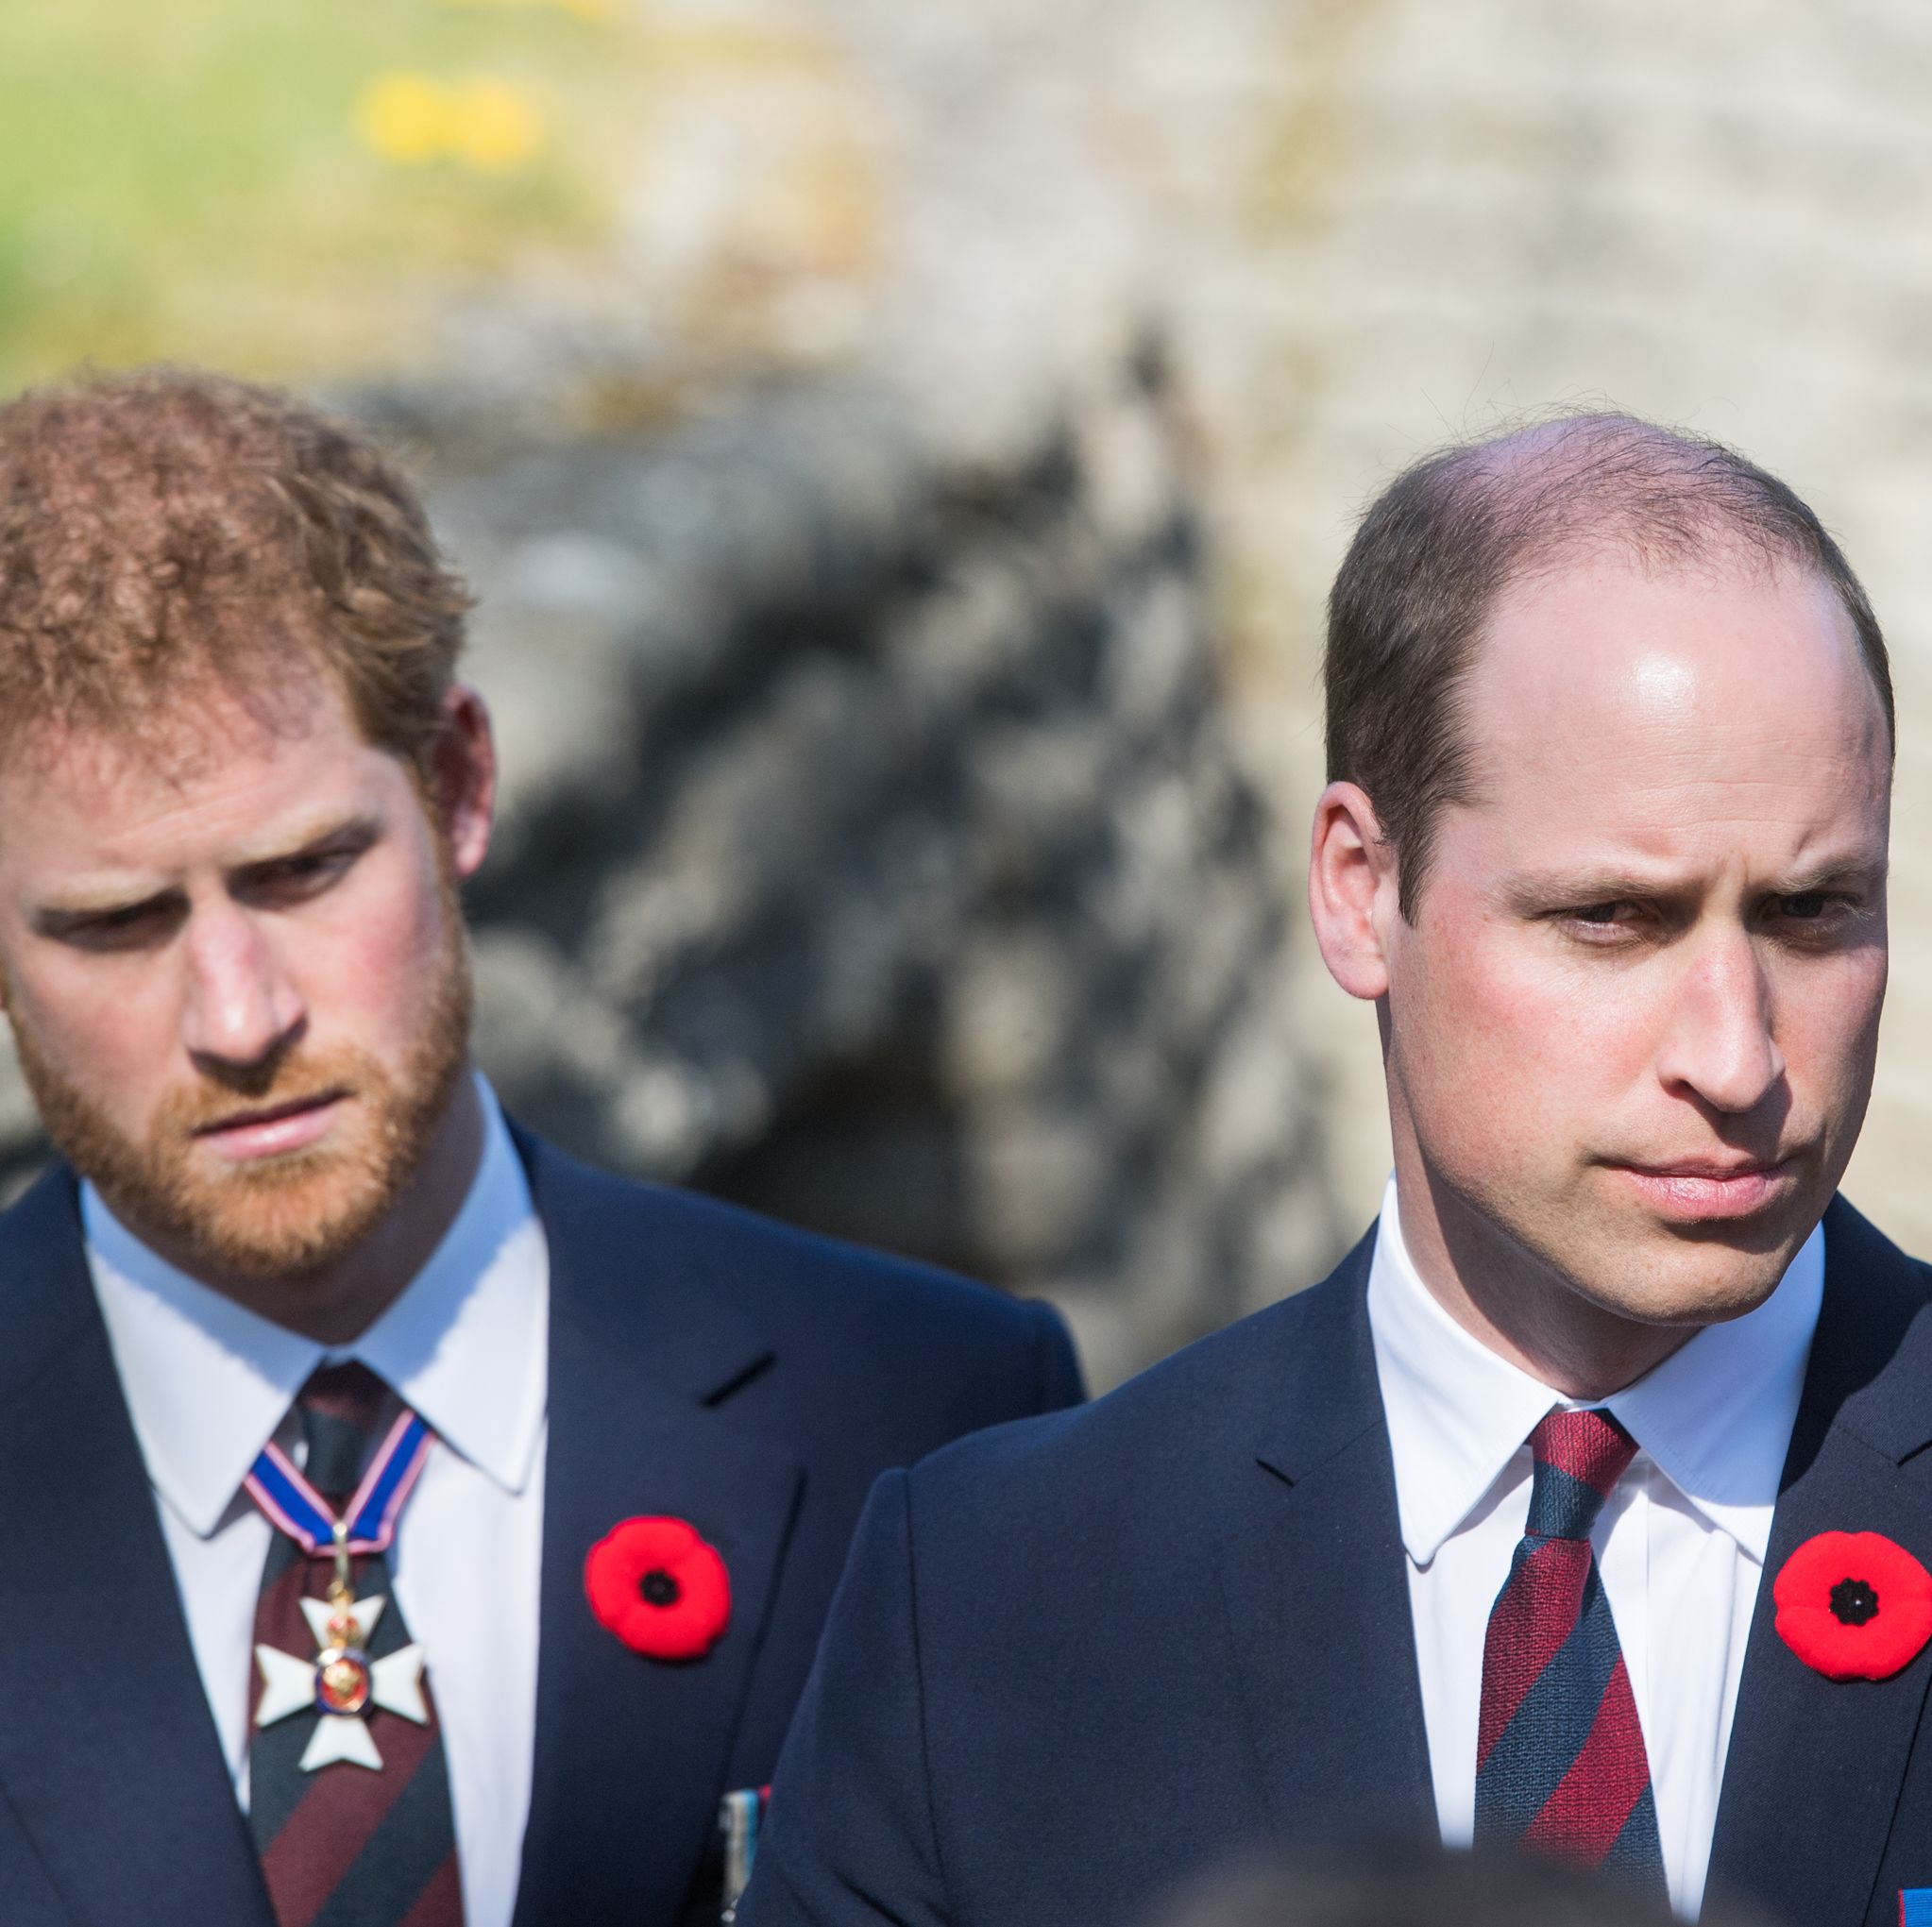 Prince Harry Accuses Prince William of Physically Attacking Him in New Book, Leaving 